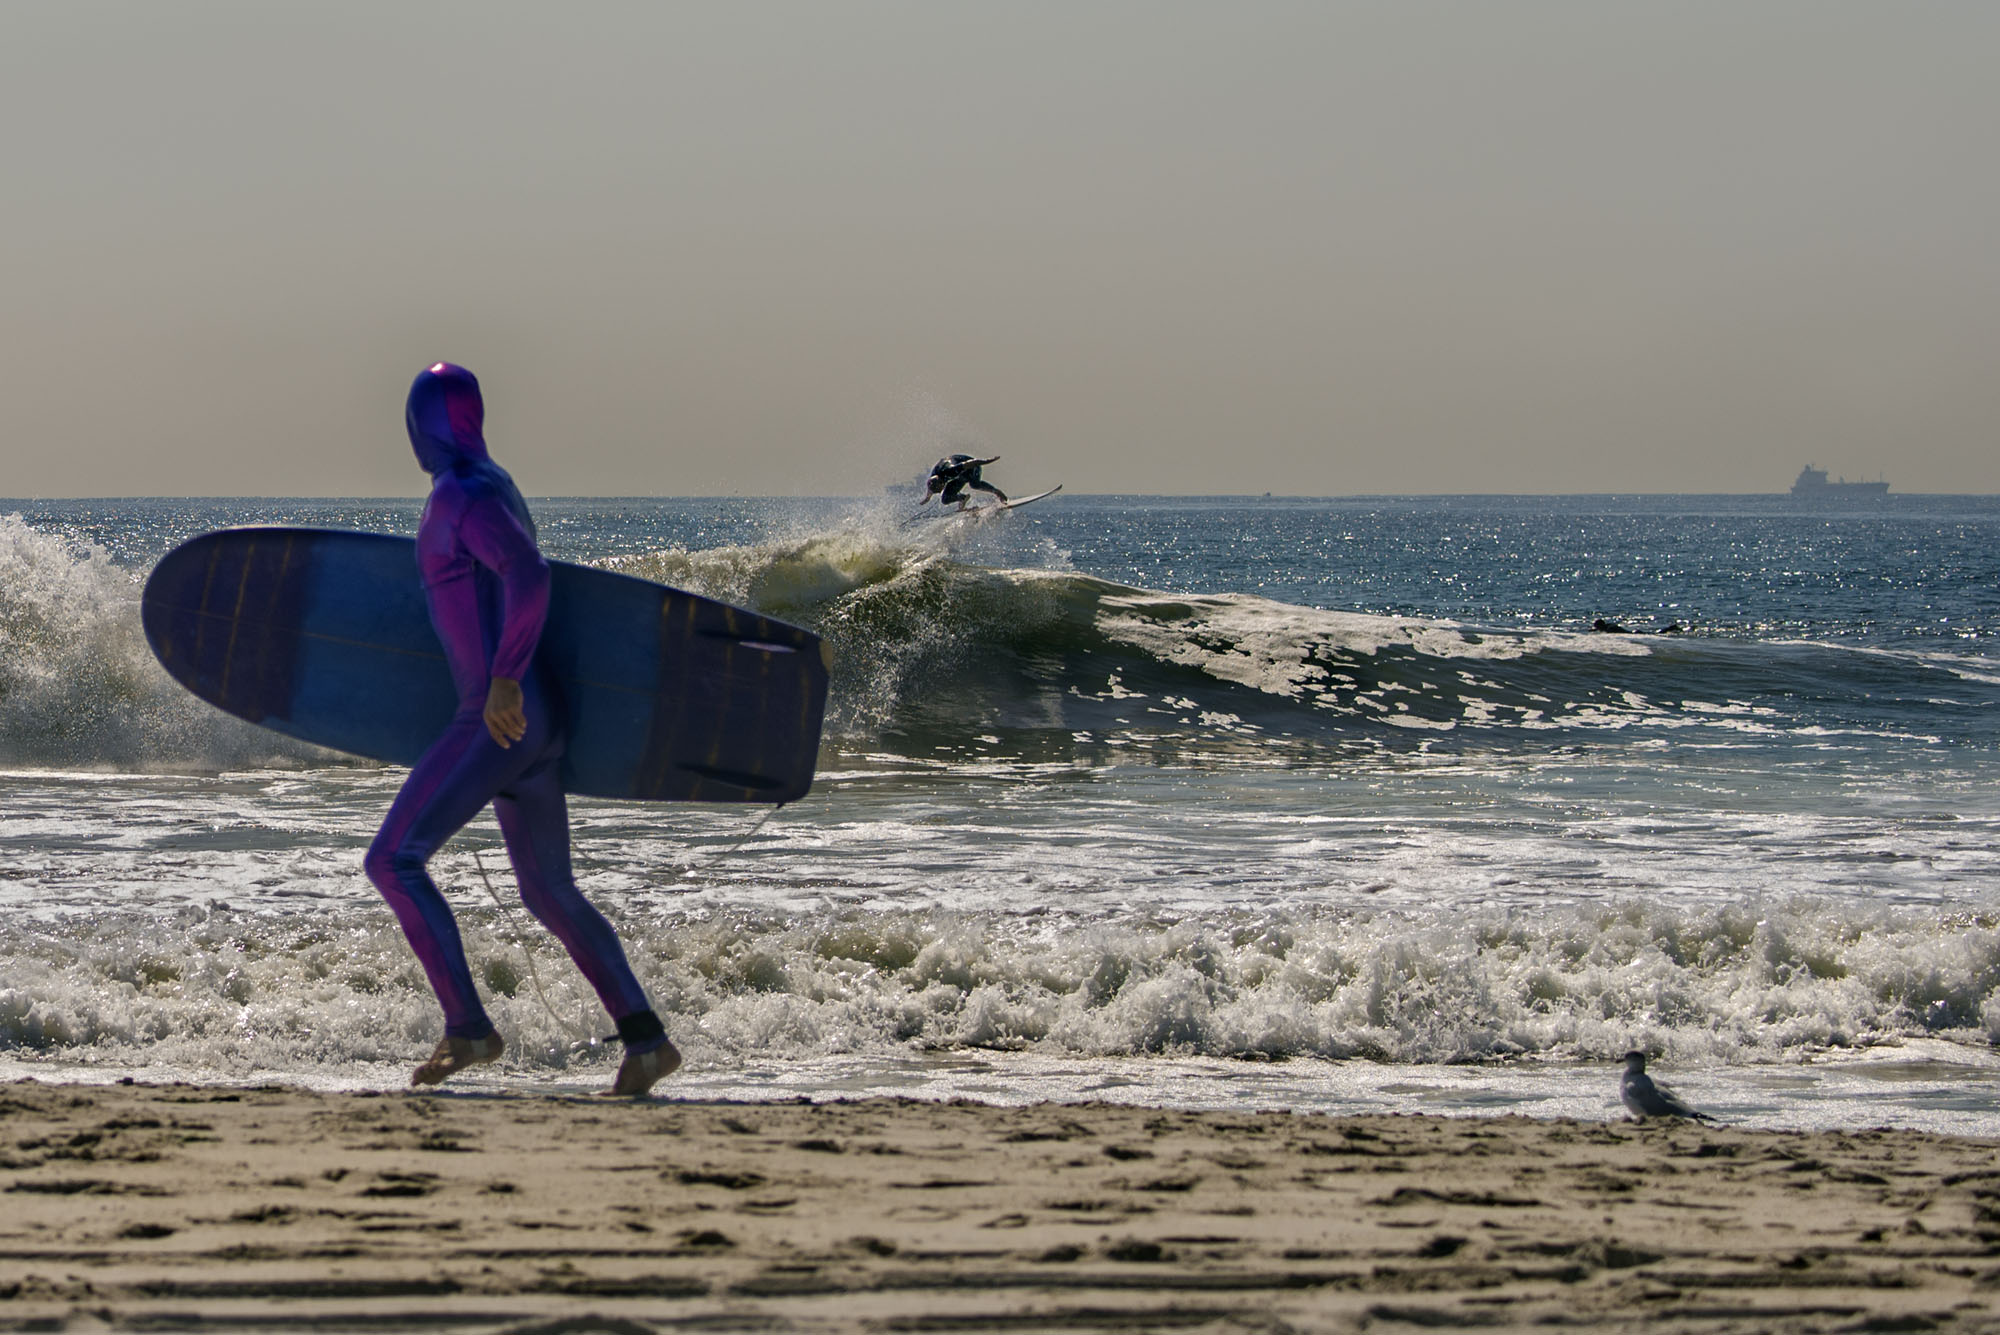 New Yorkers have been known for decades as a pane unto themselves. The photo of the purple-wetsuited surfer jogging by as another tries an ‘air’ in the background tweaks the norm of black wetsuits and uncrowded surf usually seen in magazines. Vividly abnormal, it murmurs strange breed these parts.” Derek Hynd (from Surf NYC), September 18, 2014
Lido Beach, NY, Surfer: Thaddeus O’Neil 